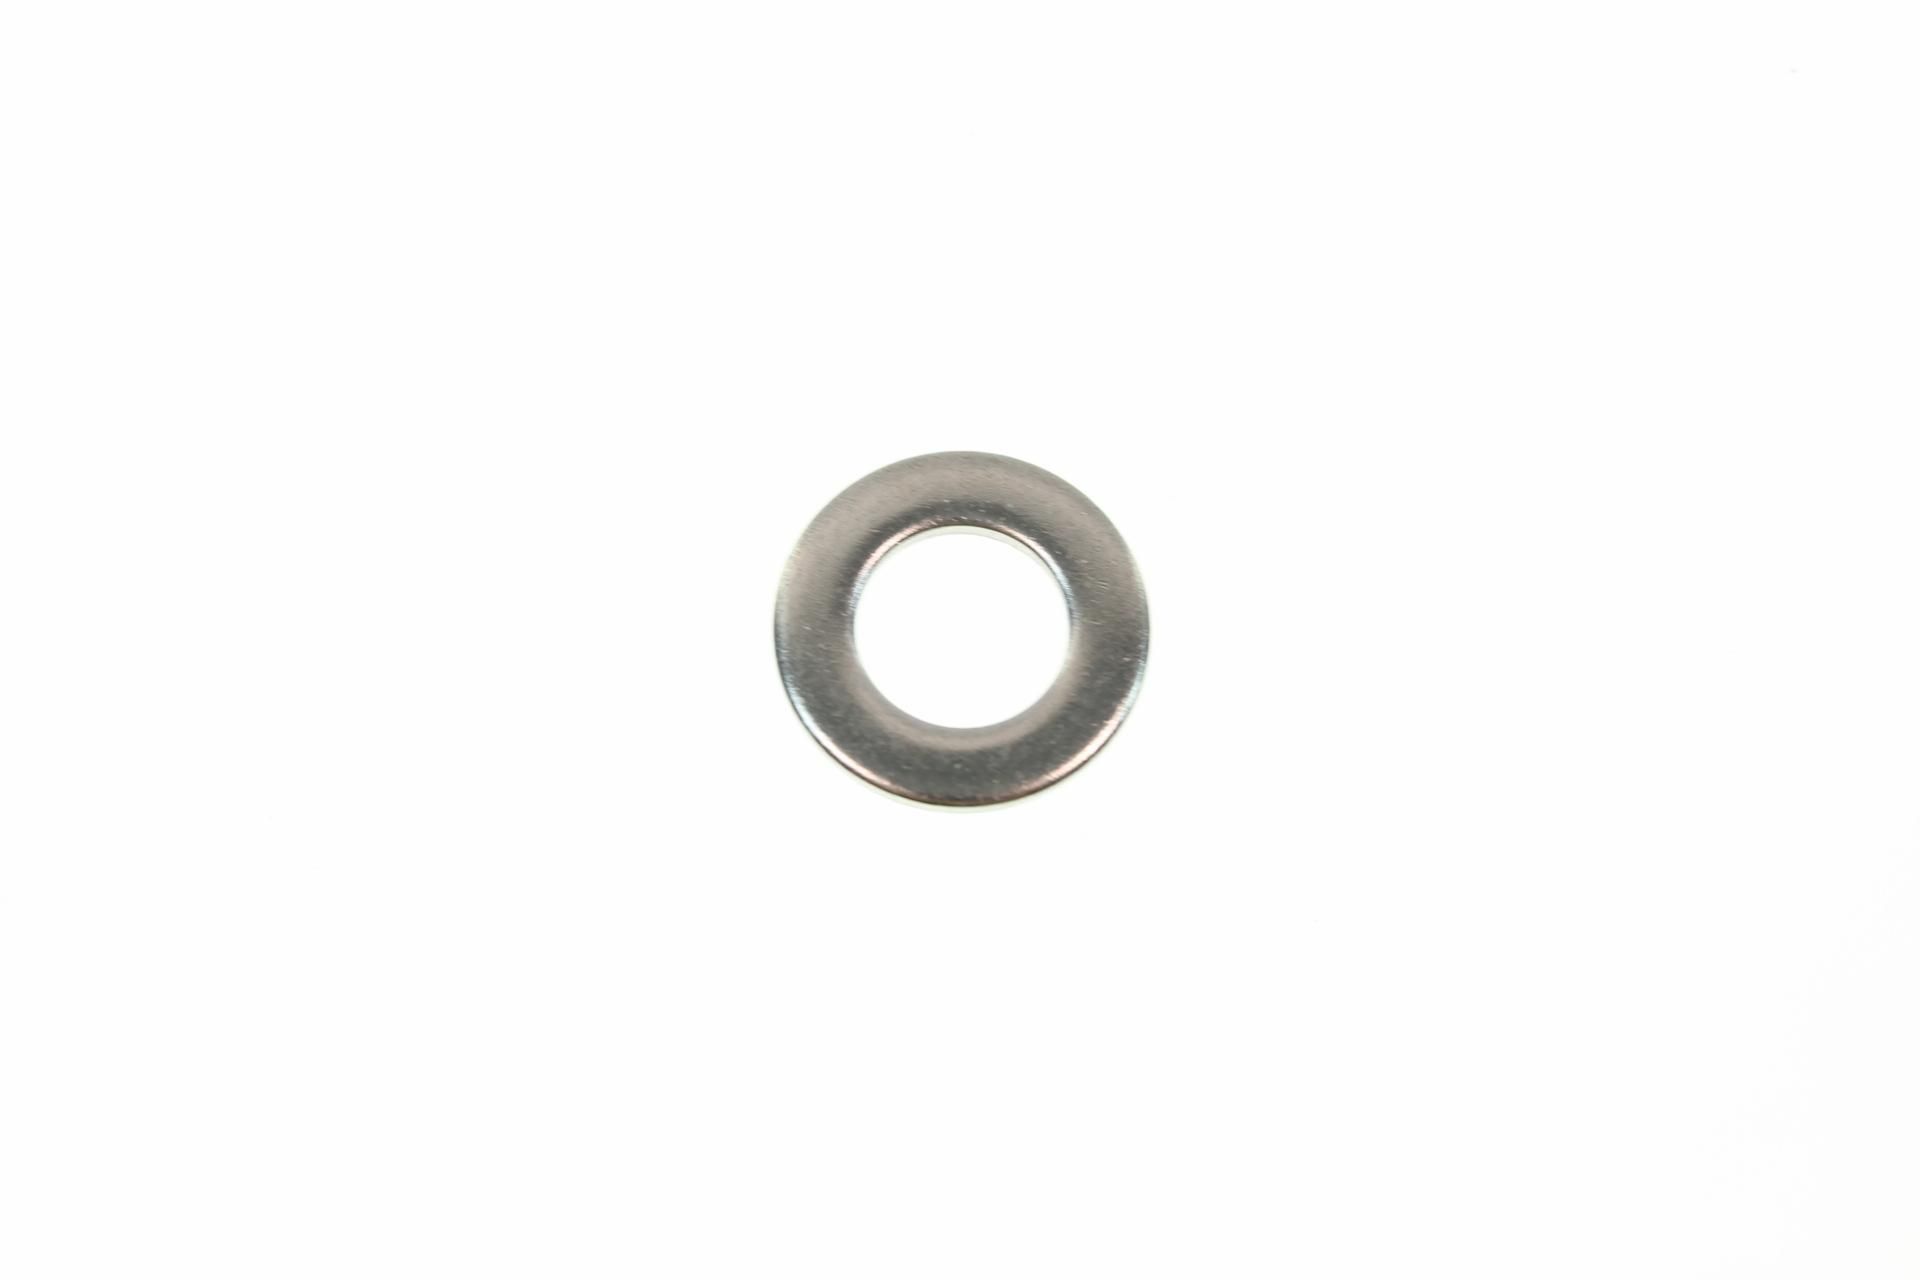 9290L-08600-00 Superseded by 92990-08600-00 - WASHER